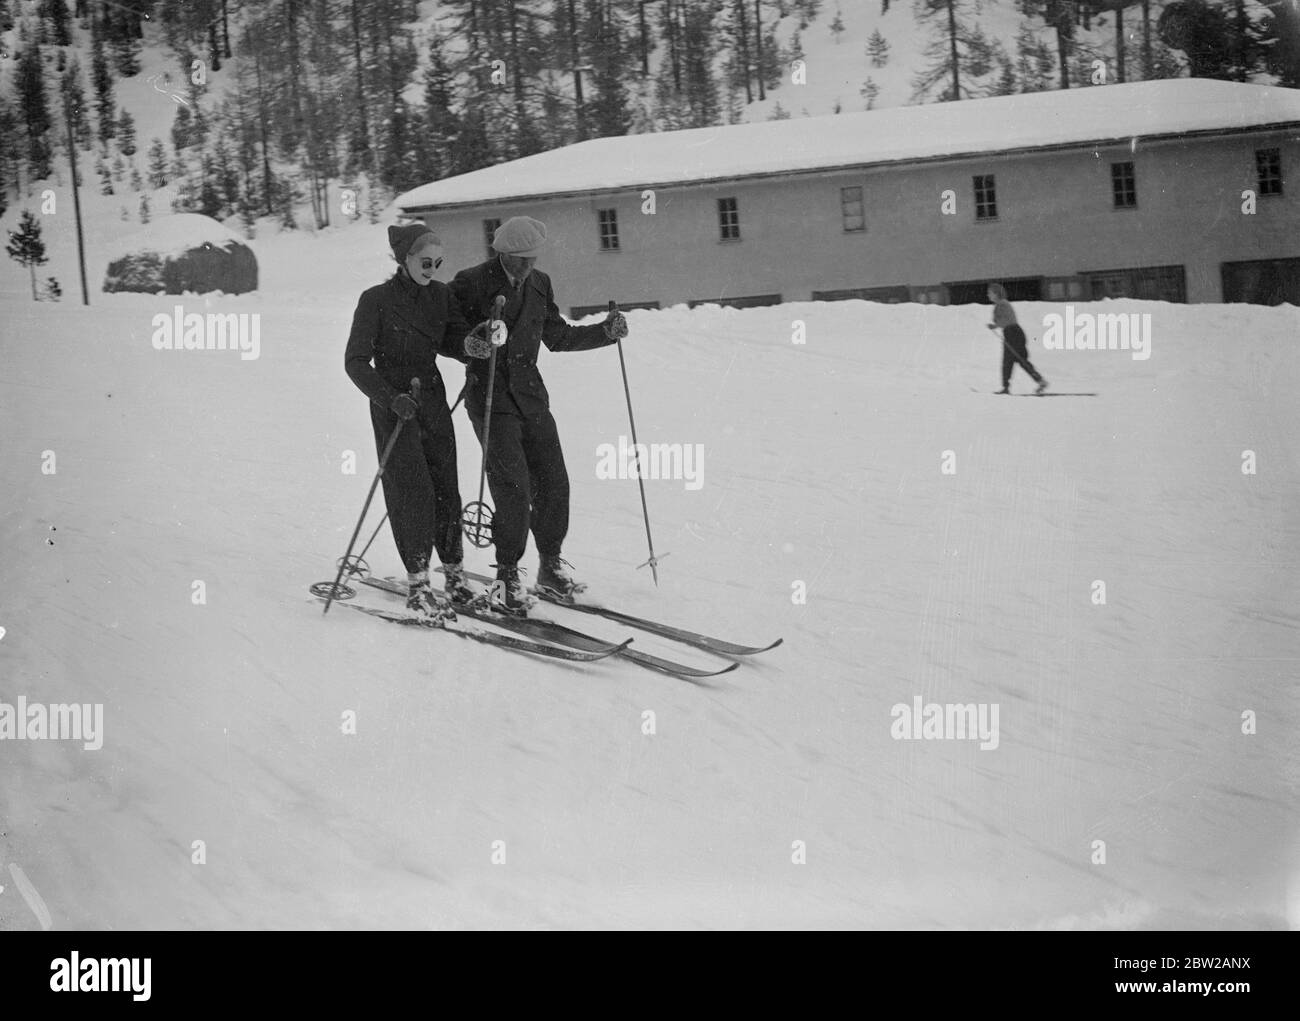 Countess Haugwitz Reventlow has skiing lesson at St Moritz. Countess Barbara Haugwitz Reventlow, (the former Barbara Hutton, Woolworth heiress) , who recently renounced her American nationality, is taking skiing lessons at St Moritz, Switzerland, where she is spending a winter sports holiday with her husband and baby, Lance. Photo shows, Countess Barbara Haugwitz Reventlow, wearing dark glasses, as she had a skiing lesson at St Moritz. 31 December 1937 Stock Photo